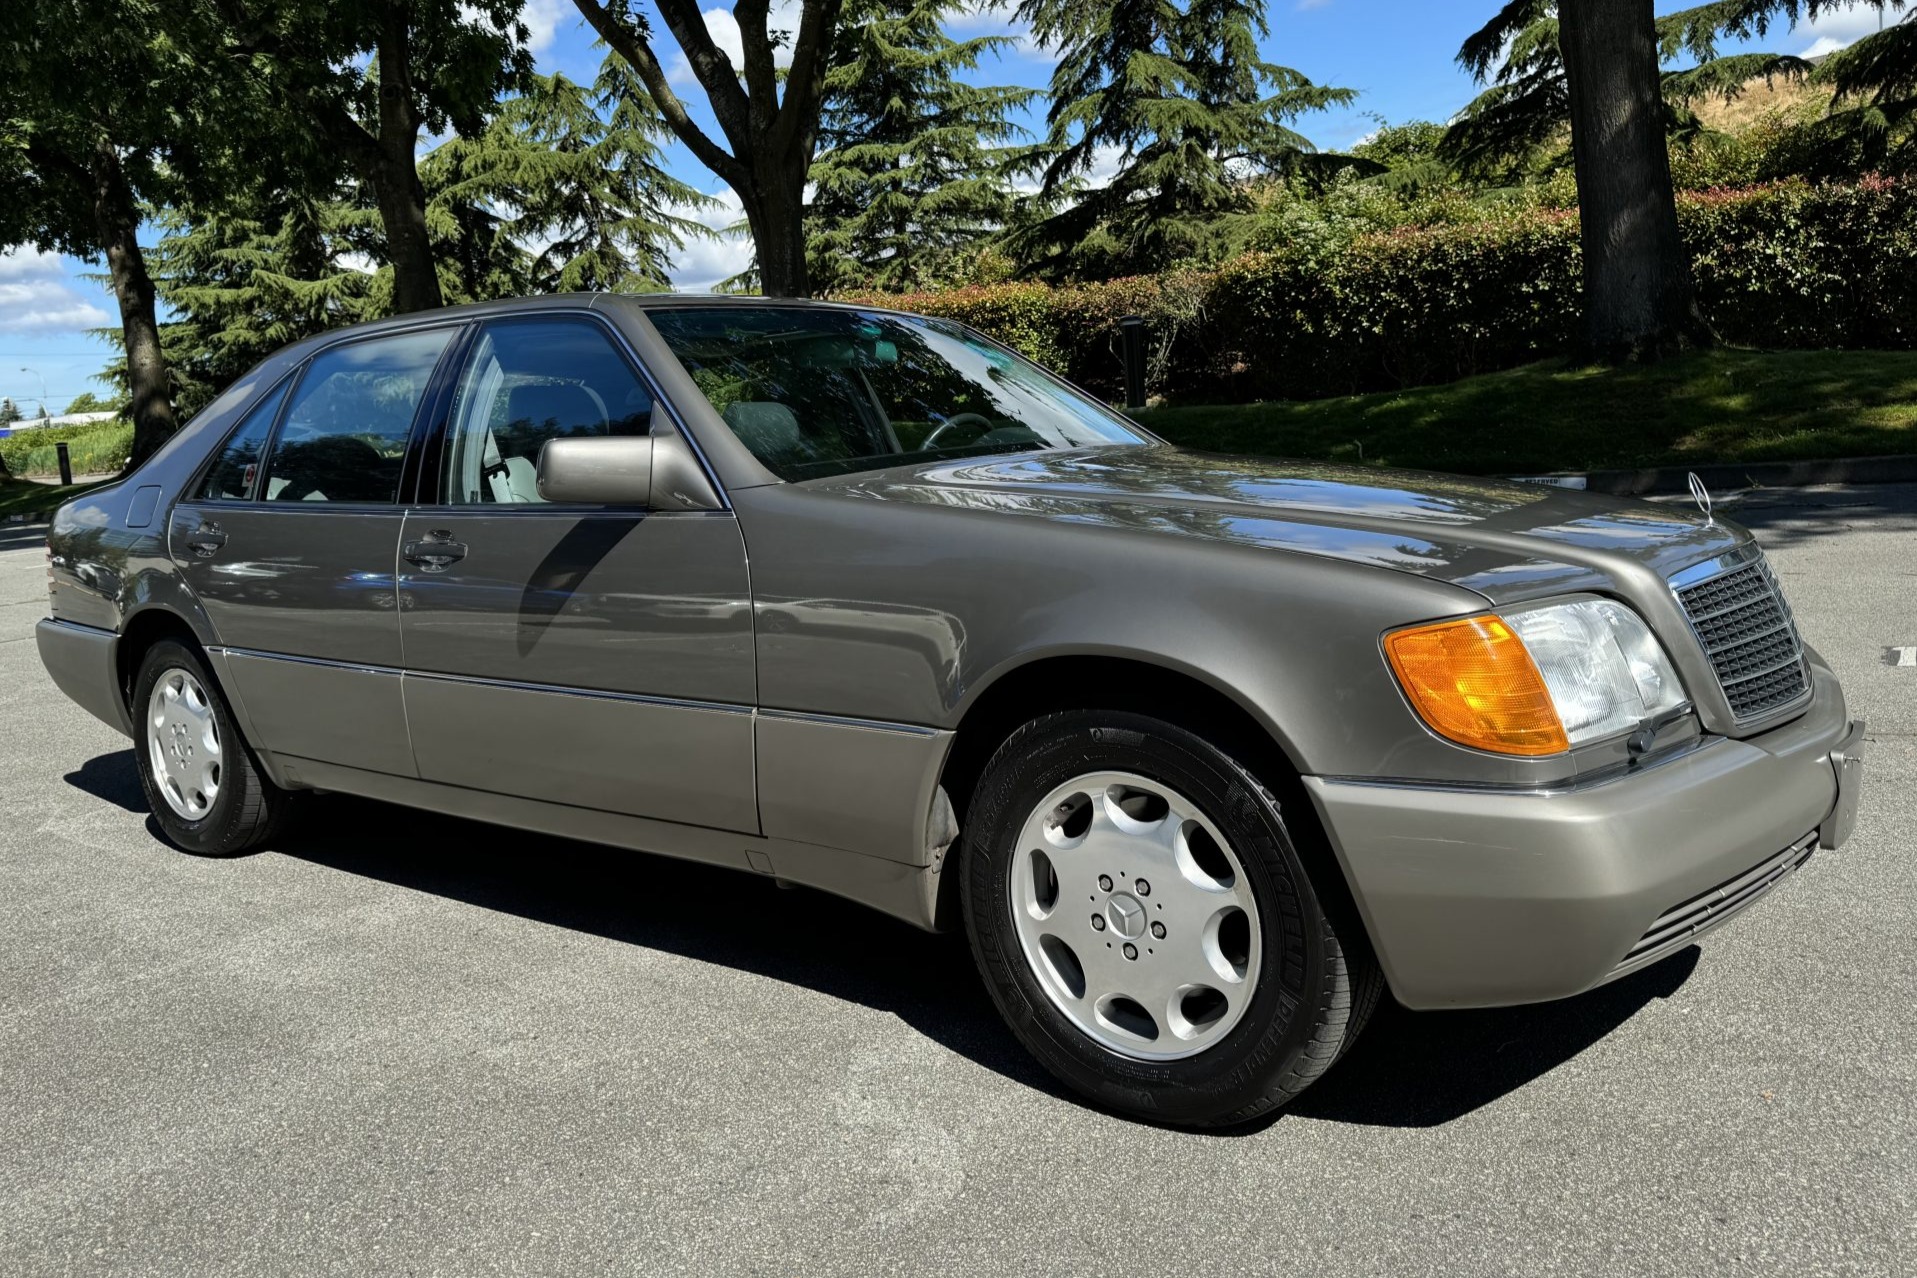 Used 1993 Mercedes-Benz 400SEL Review